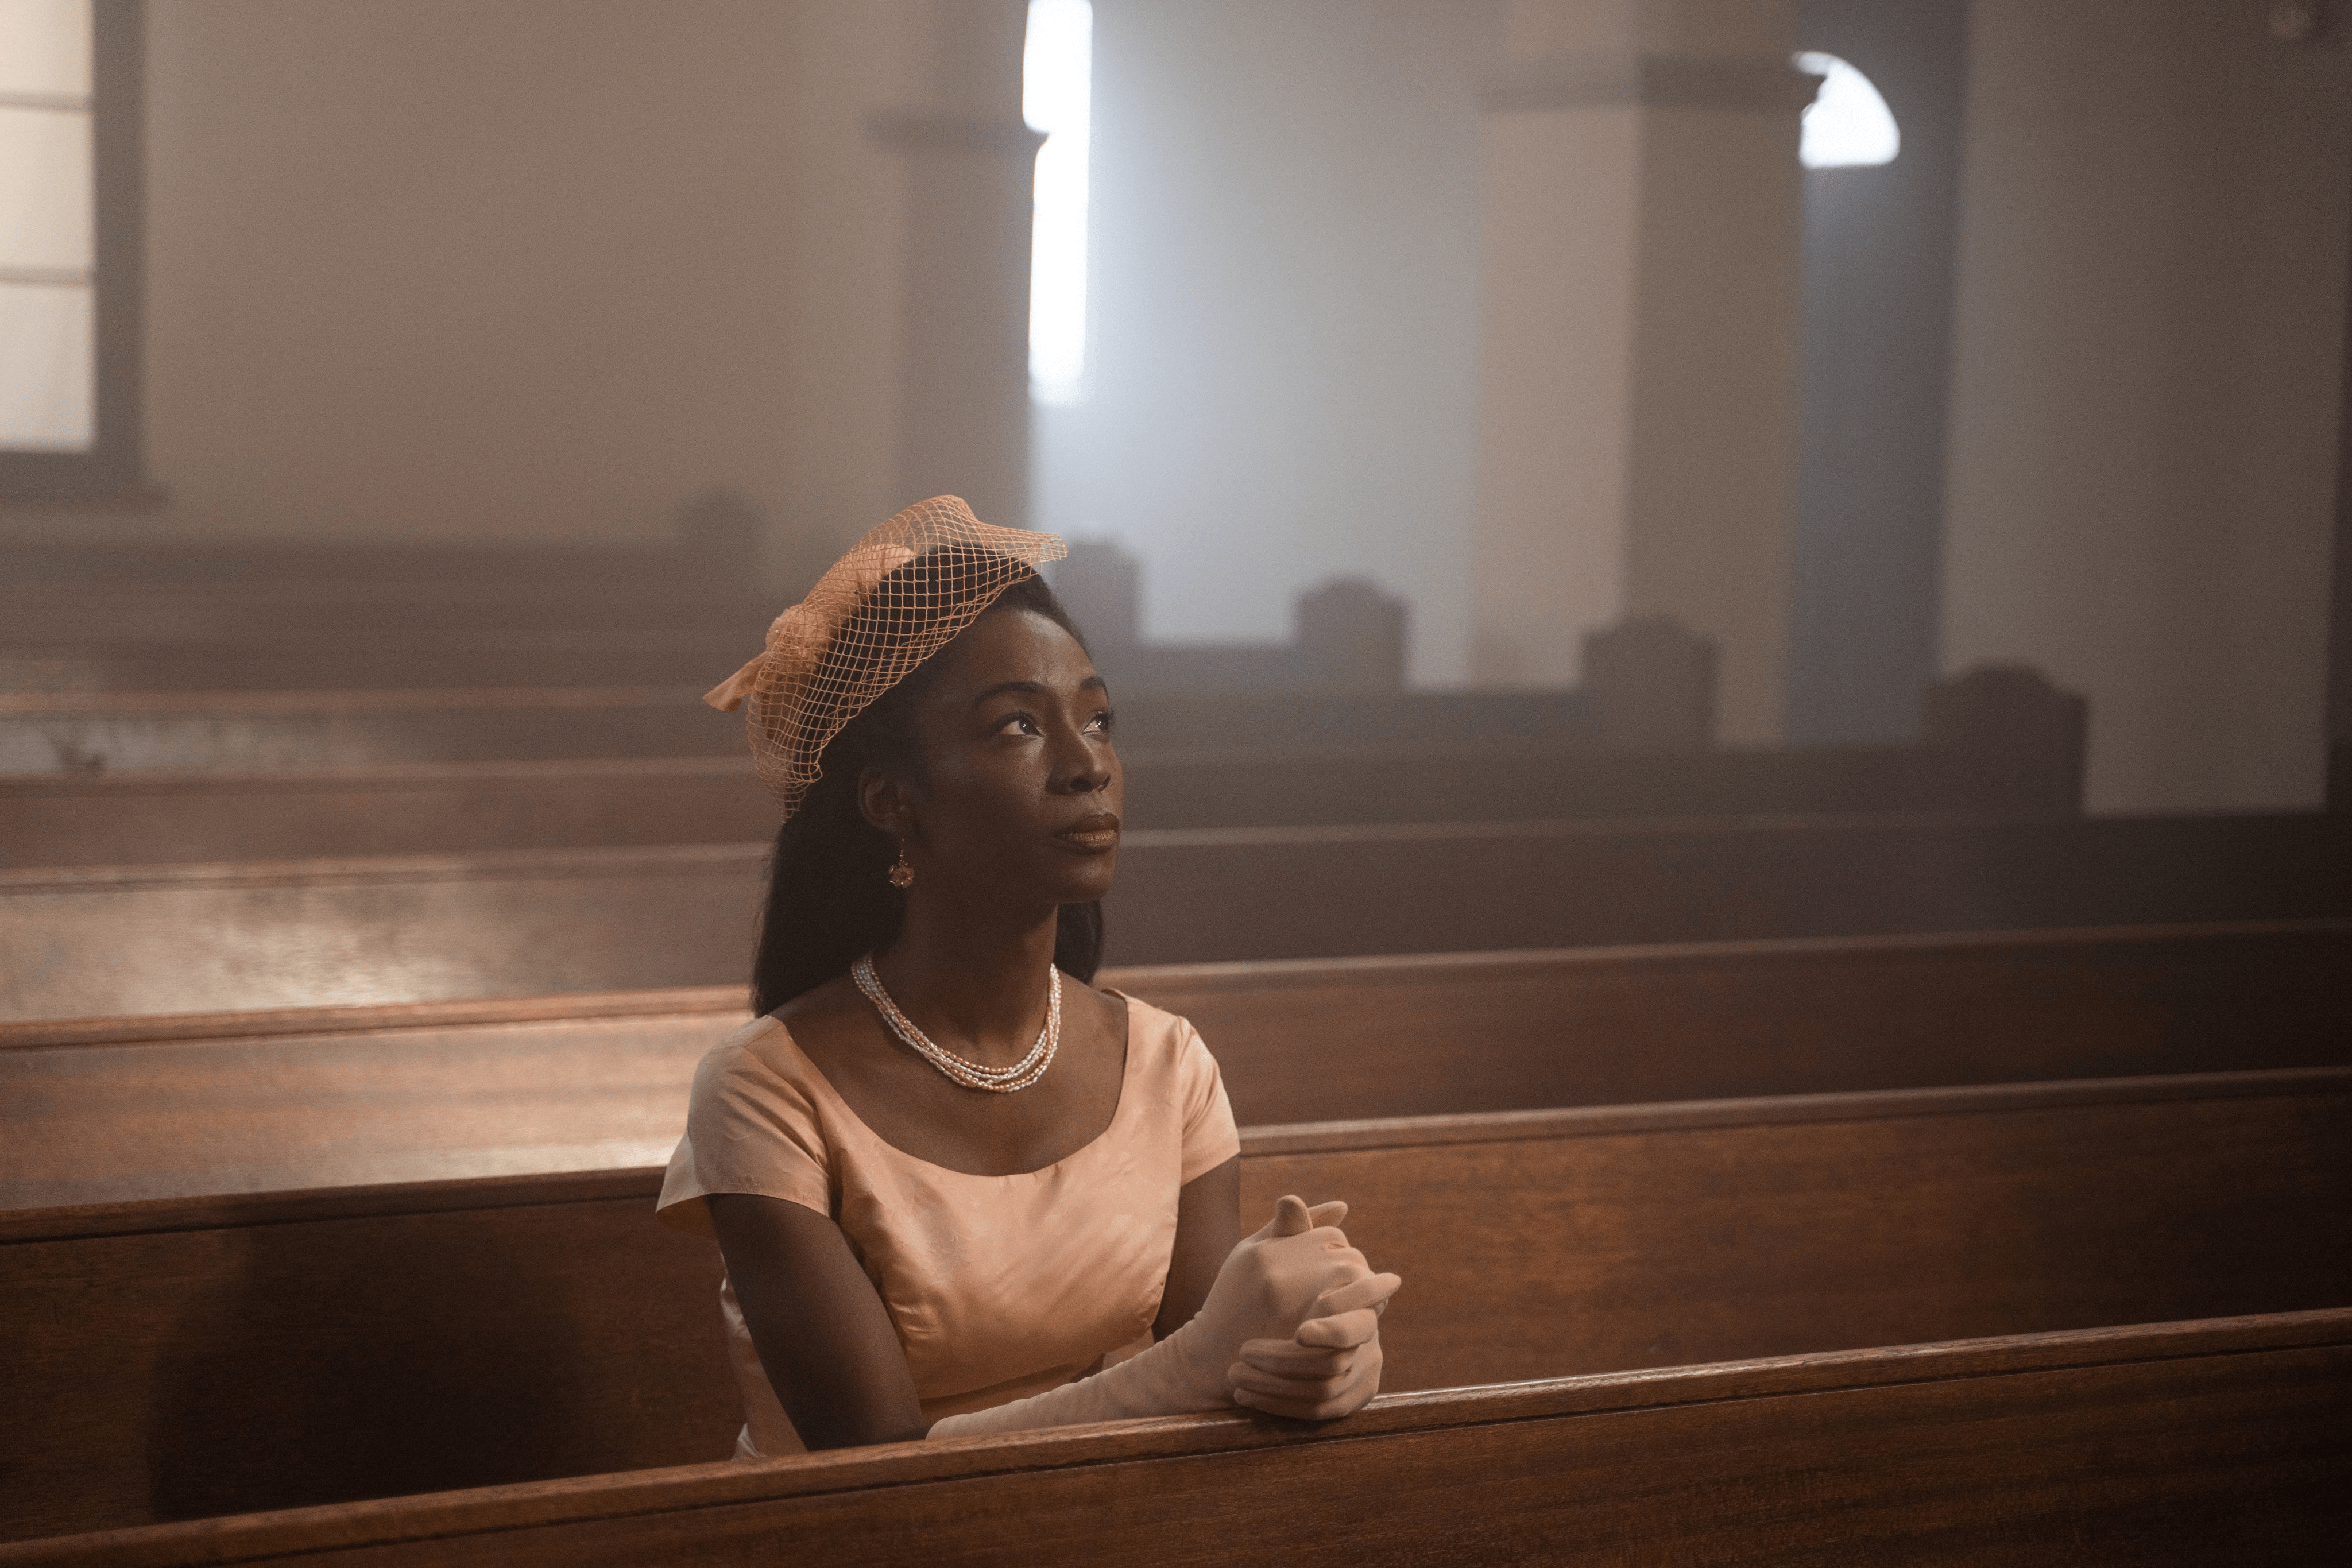 Angelica Ross is alone at a Church, sitting in a pew with hands together looking up.